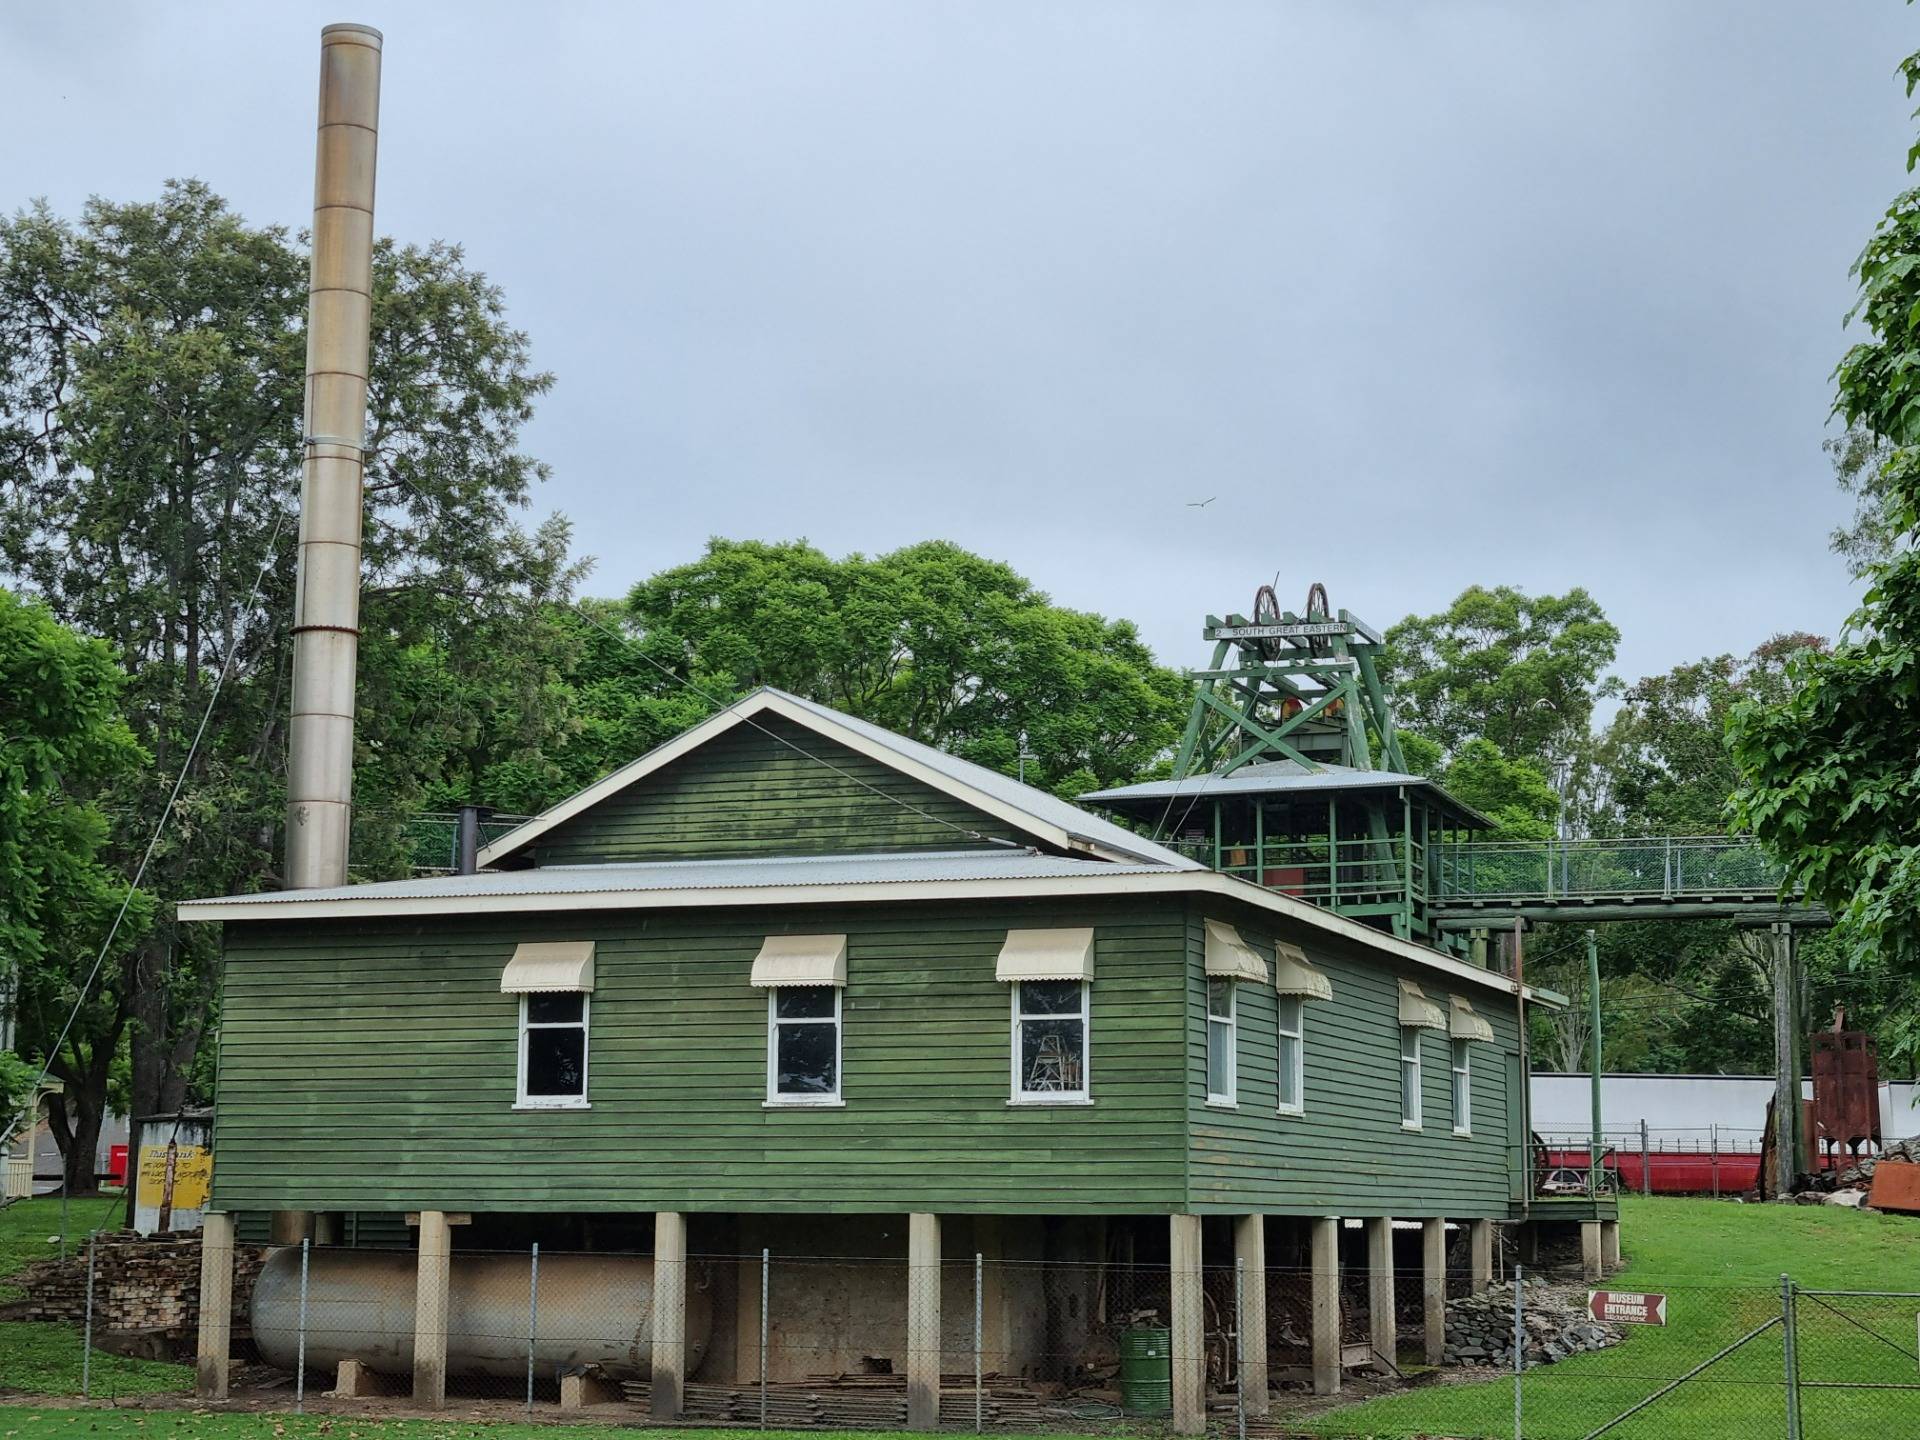 The Gympie Gold Mining and Historical Museum is located right next door.